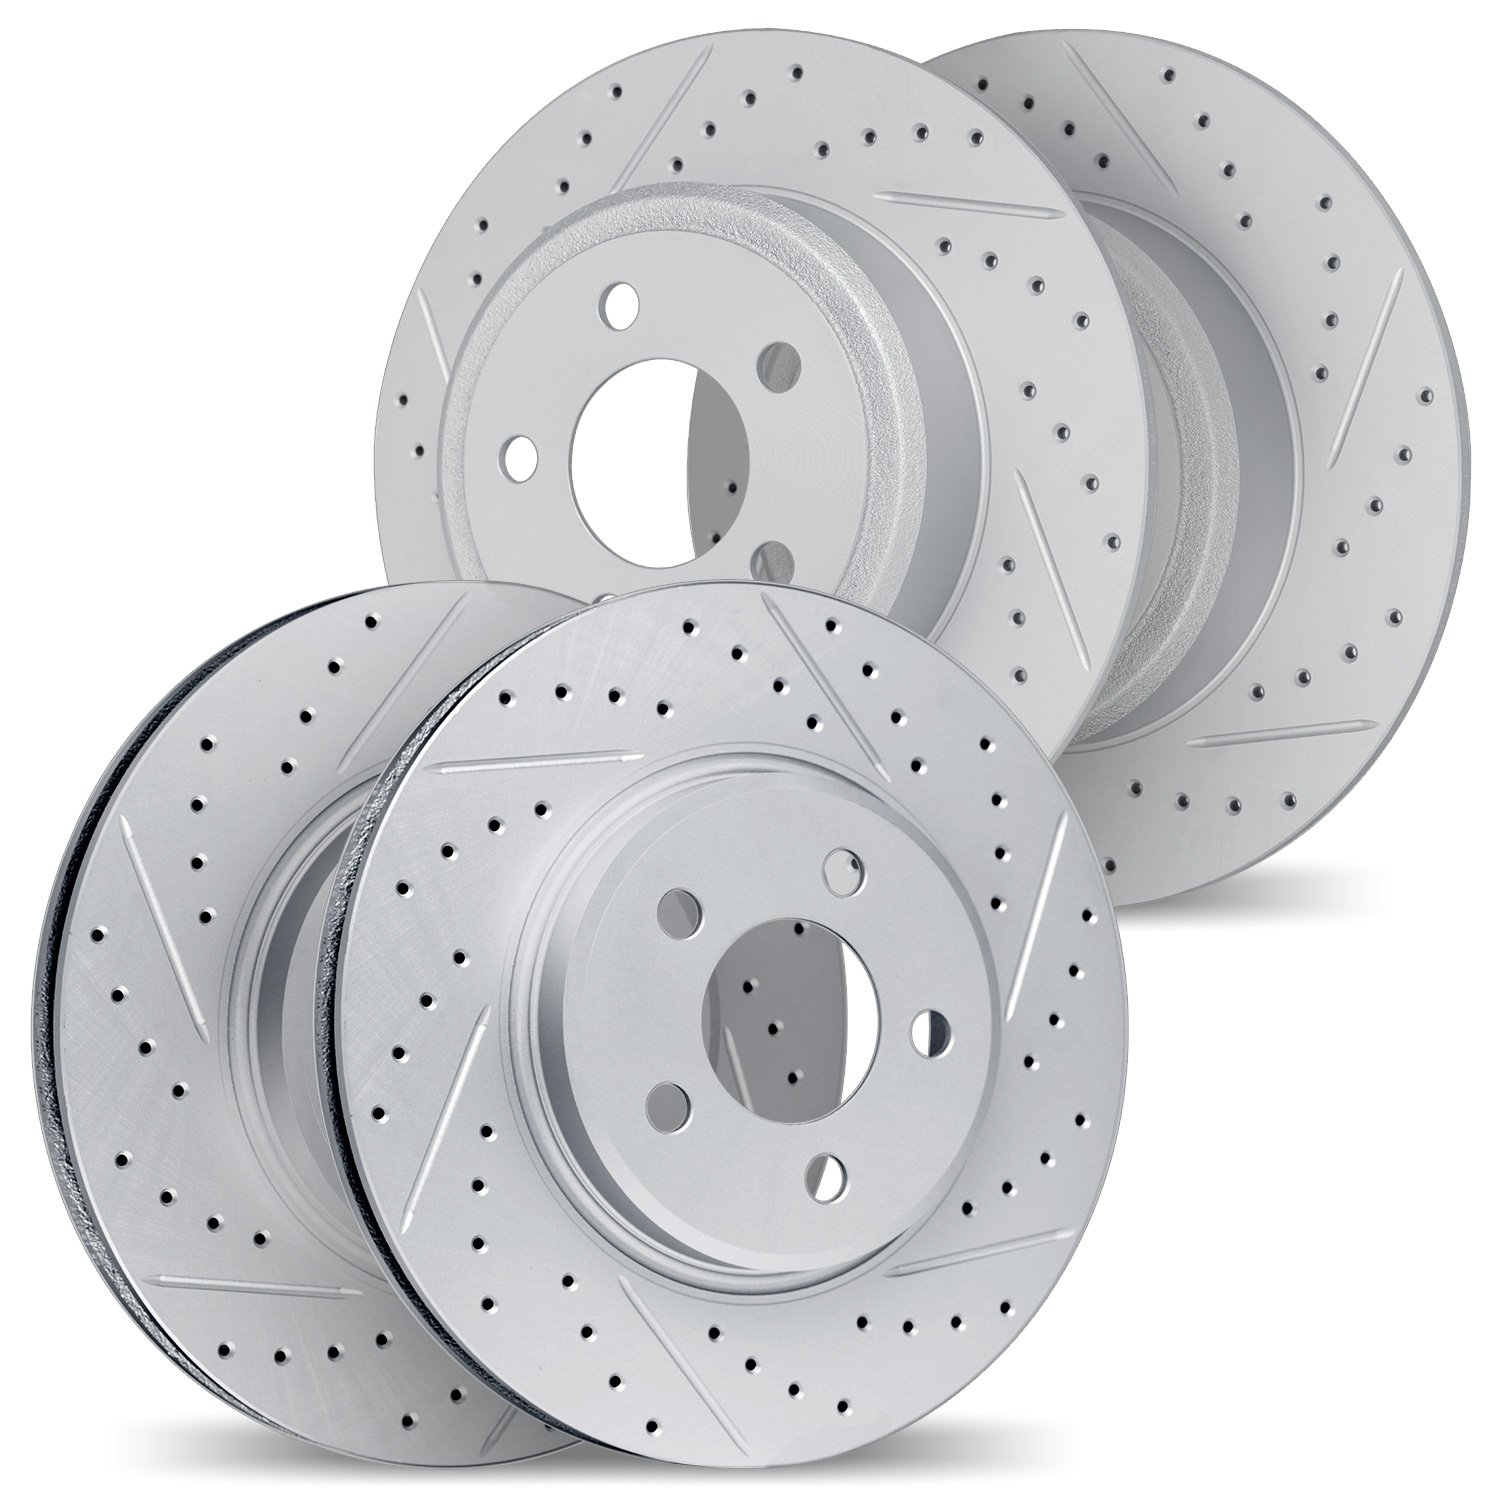 2004-13039 Geoperformance Drilled/Slotted Brake Rotors, 2015-2021 Subaru, Position: Front and Rear